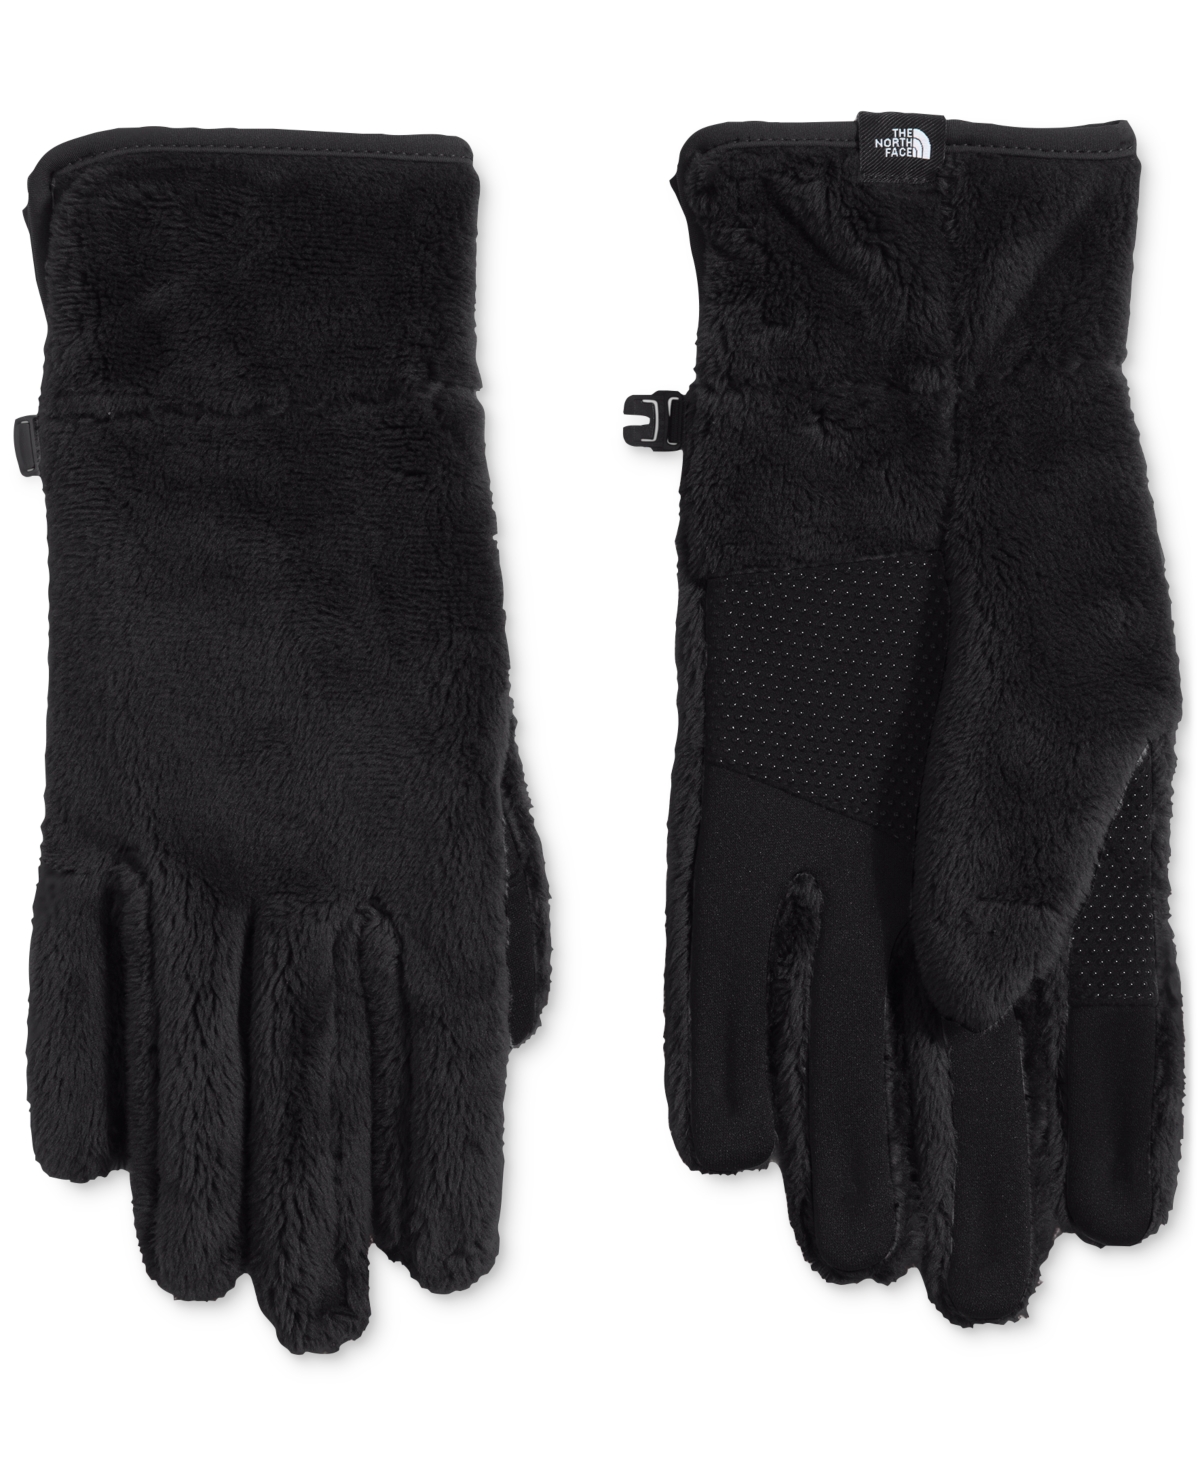 THE NORTH FACE WOMEN'S OSITO ETIP GLOVES